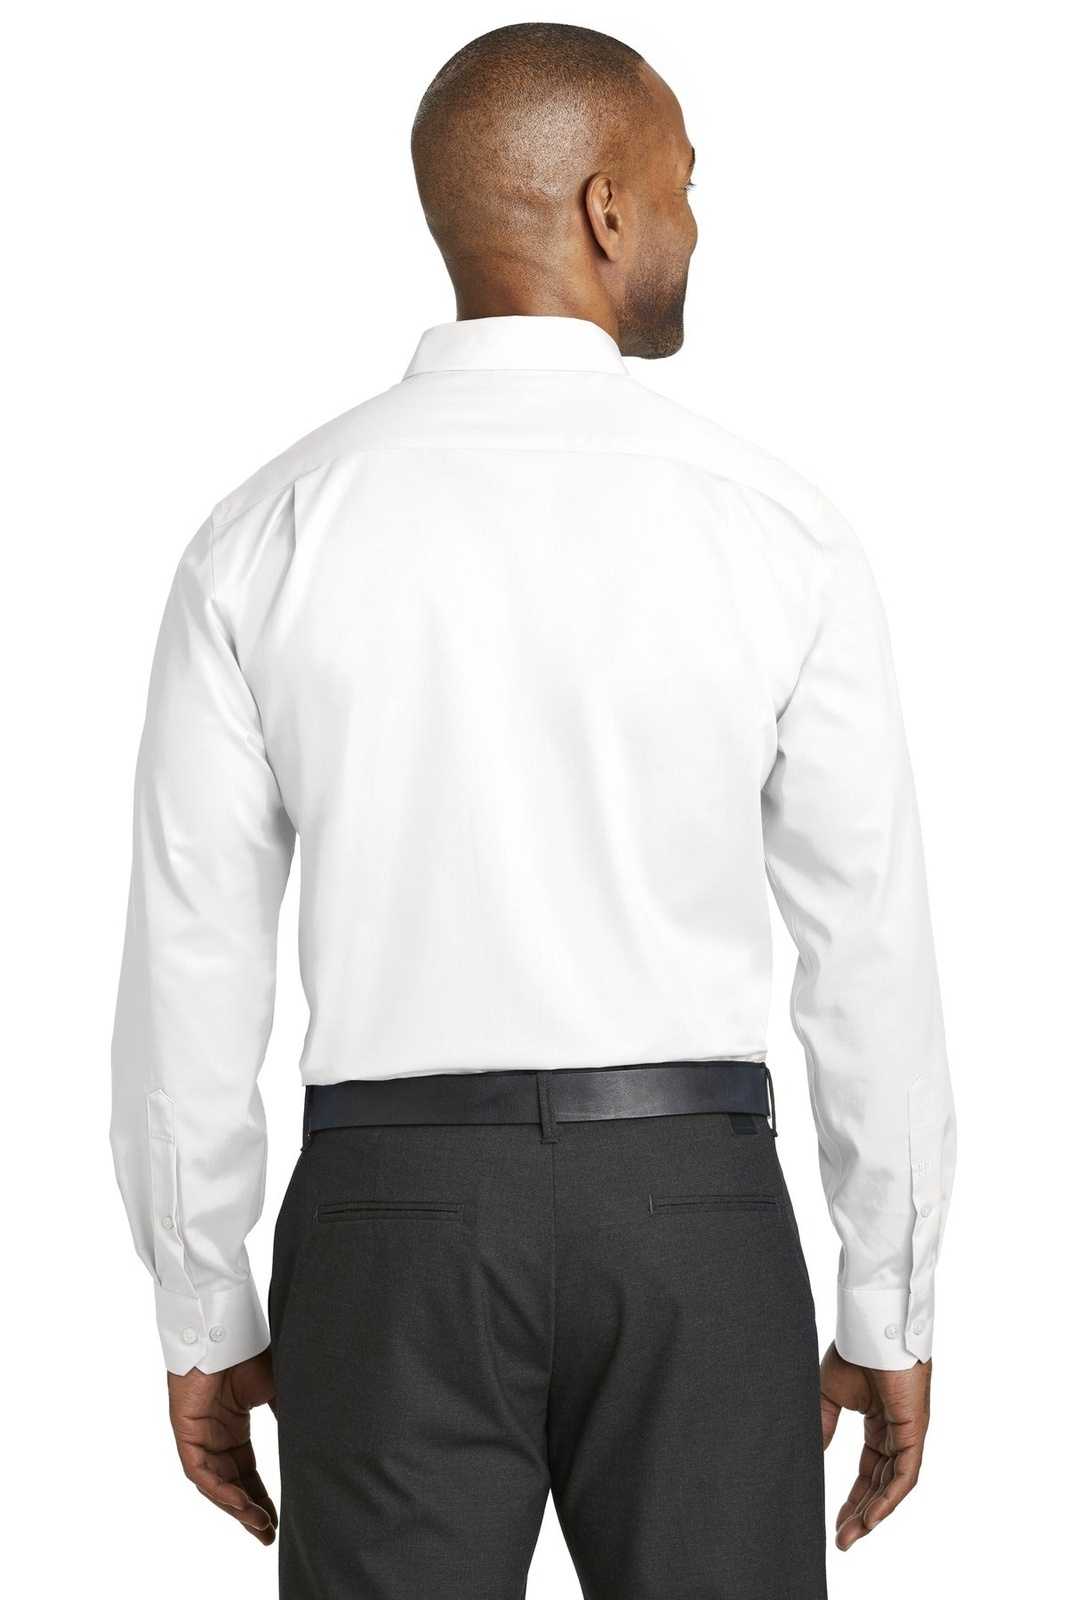 Red House RH80 Slim Fit Non-Iron Twill Shirt - White - HIT a Double - 2